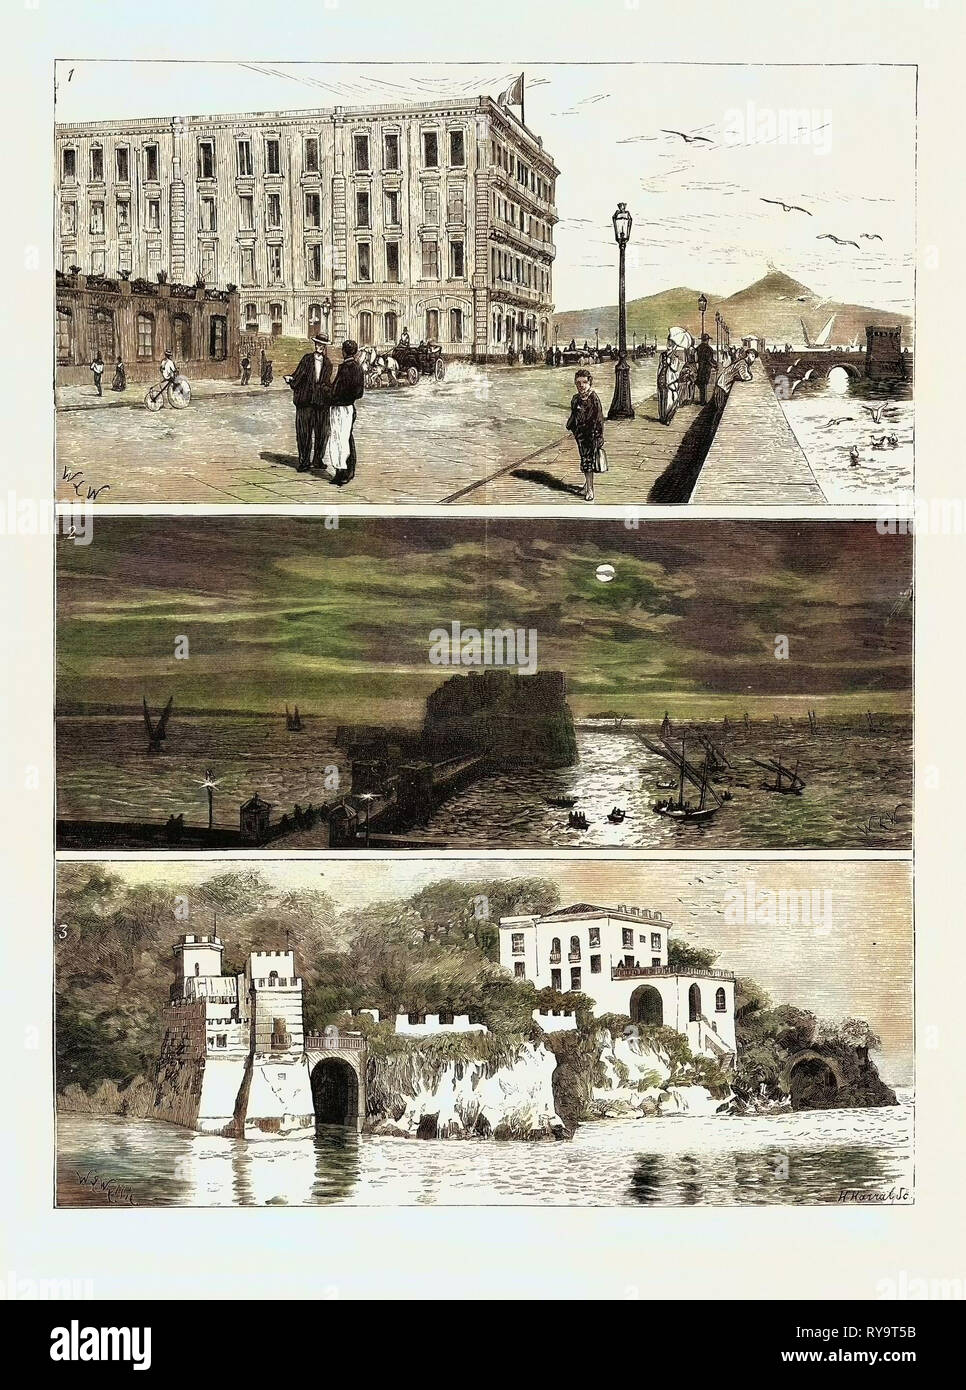 The Ex Khedive of Egypt at Naples, Italy, Engraving 1879, 1, Royal Hotel Des Etrangers, Temporary Residence of Ismail Pasha and His Sons. 2. The Bay of Naples, from Ismail Pasha's Apartments.-3. The Villa Maraval Roccabella, Residence of the Ladies of the Ex-Khedive's Family Stock Photo